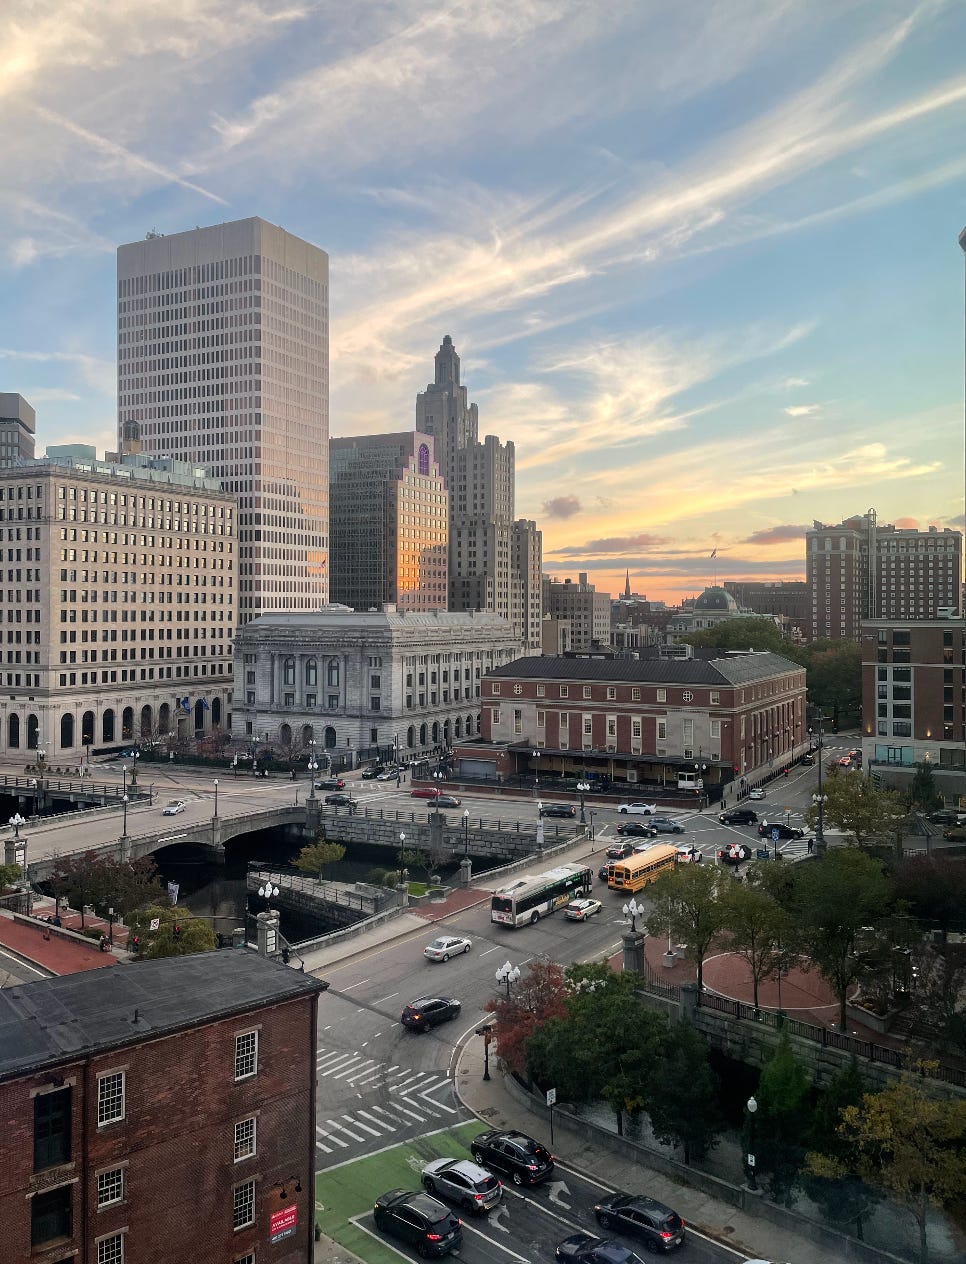 The providence skyline during a golden hour sunset. The sky is streaked with lies of clouds and purple, blue and yellow hues.